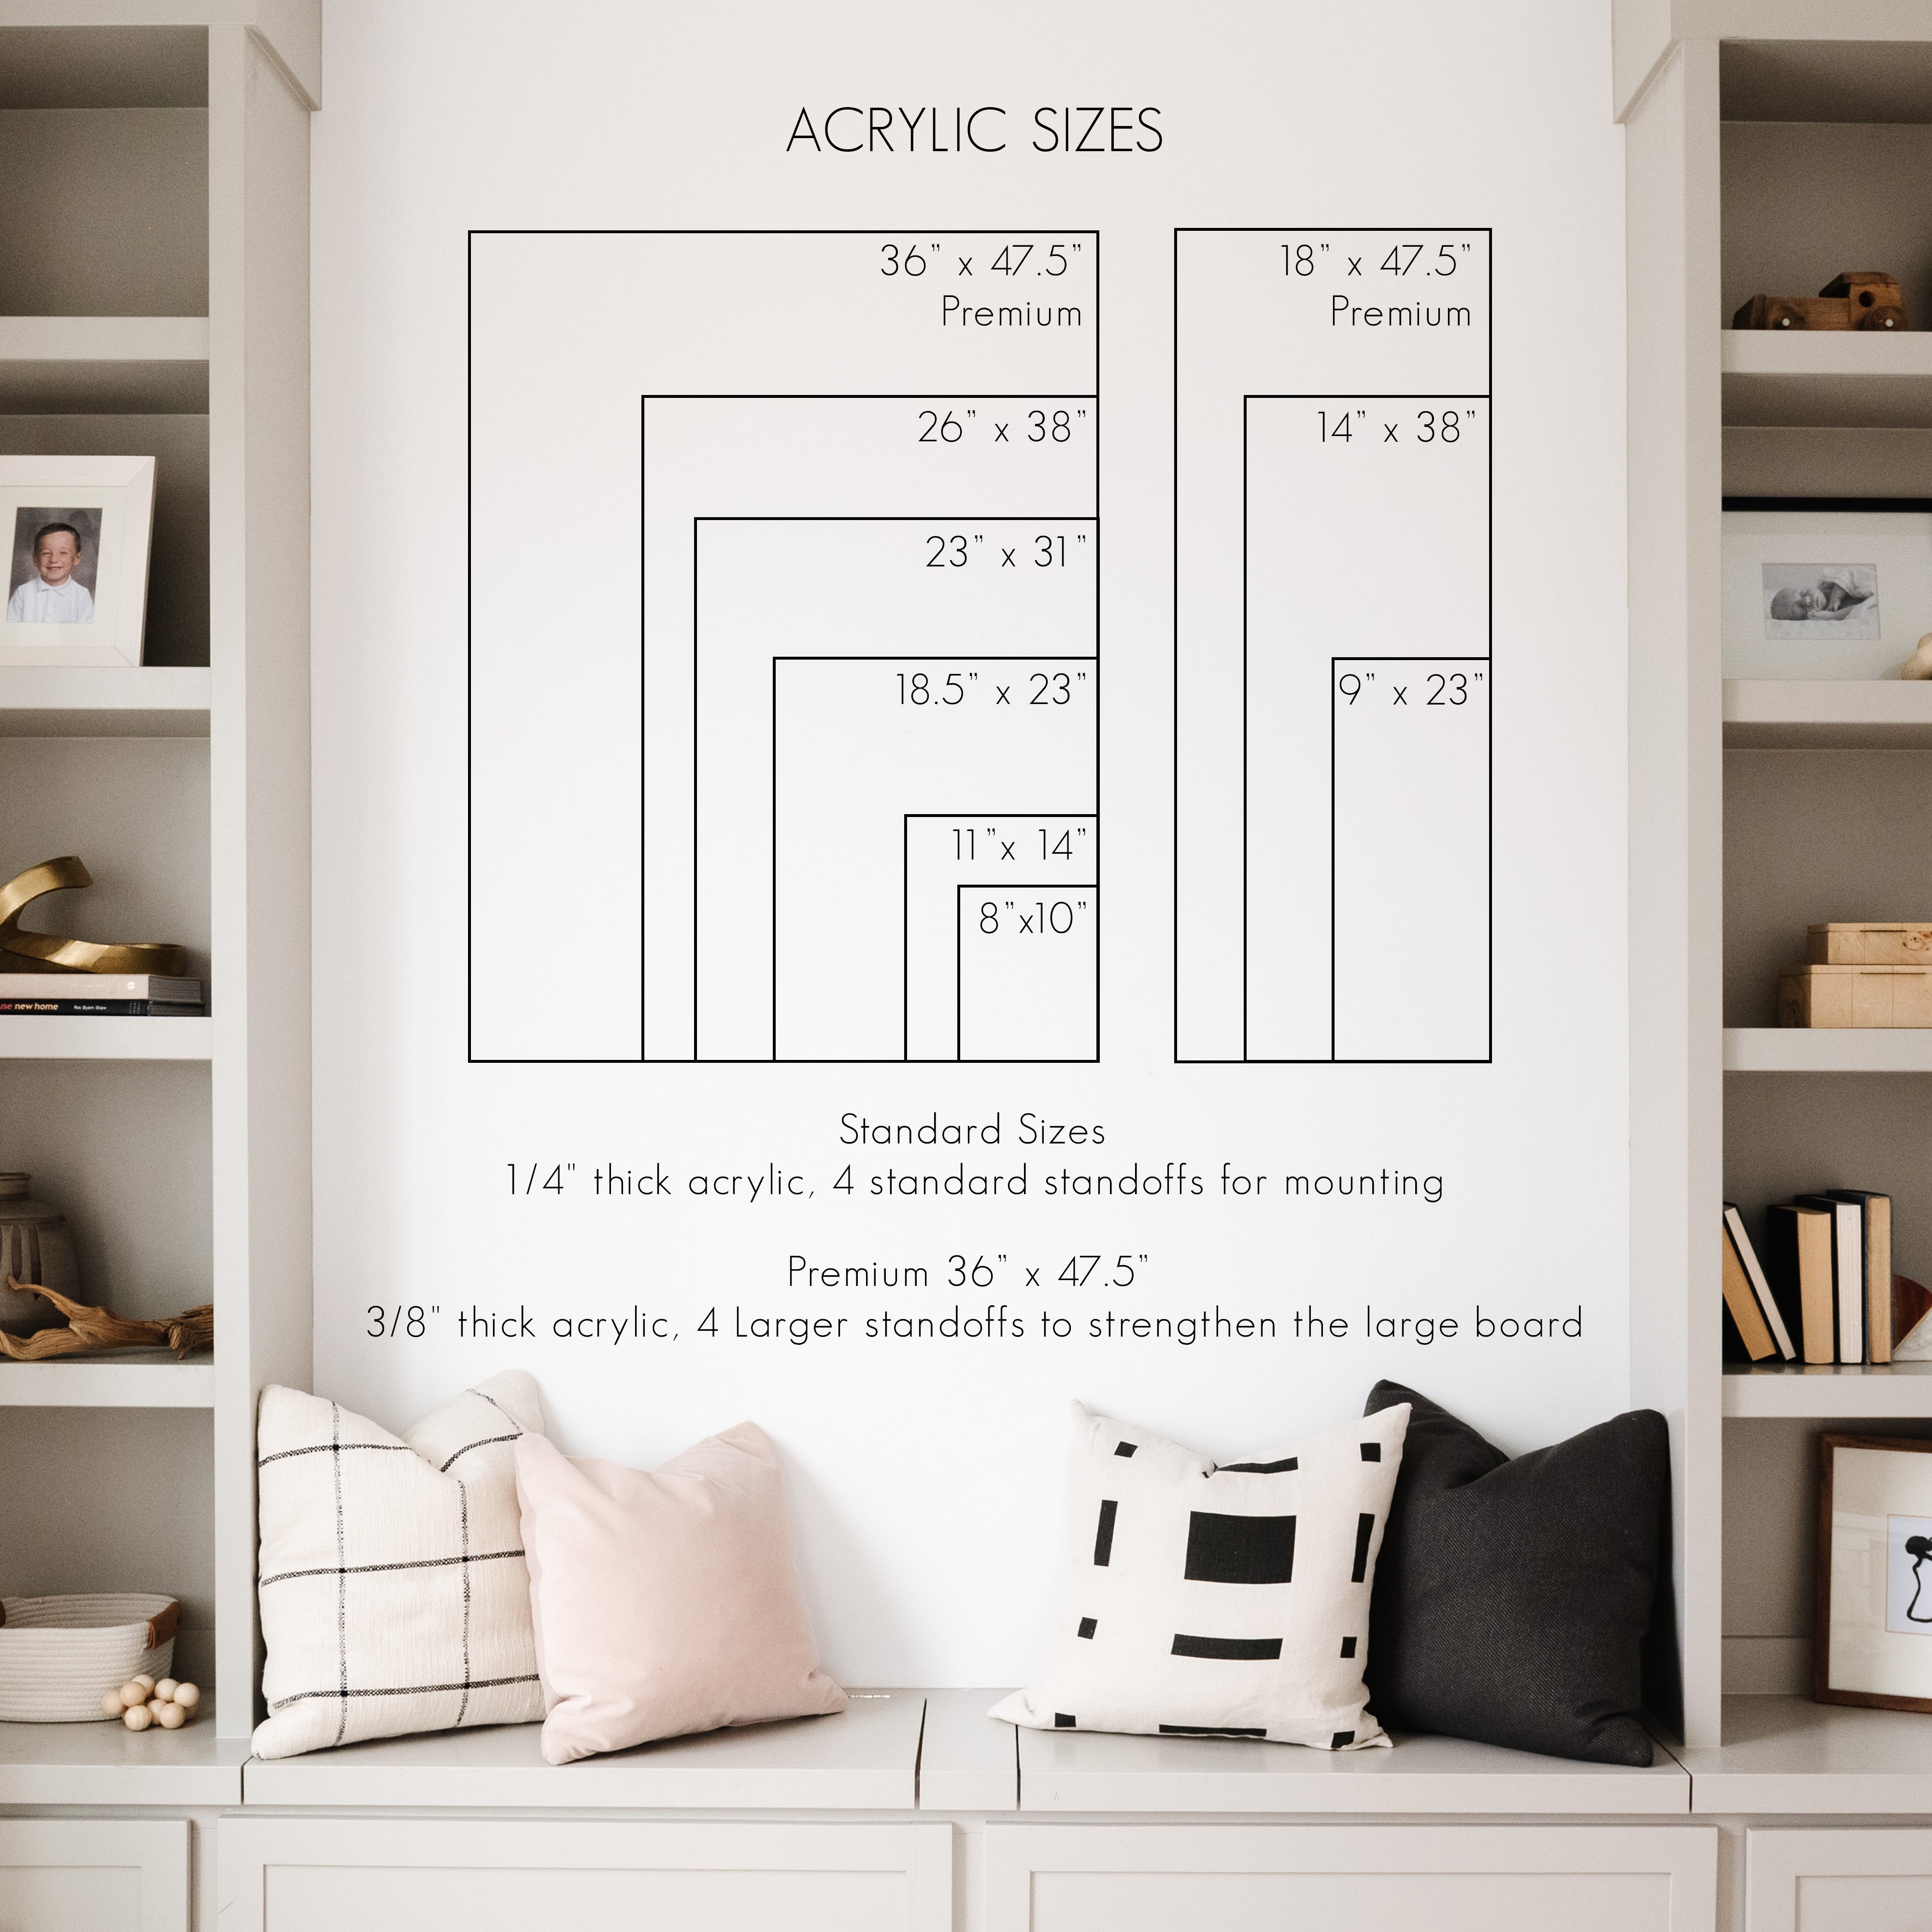 Monthly Frosted Acrylic Calendar + 5 Sections | Vertical Minimalist